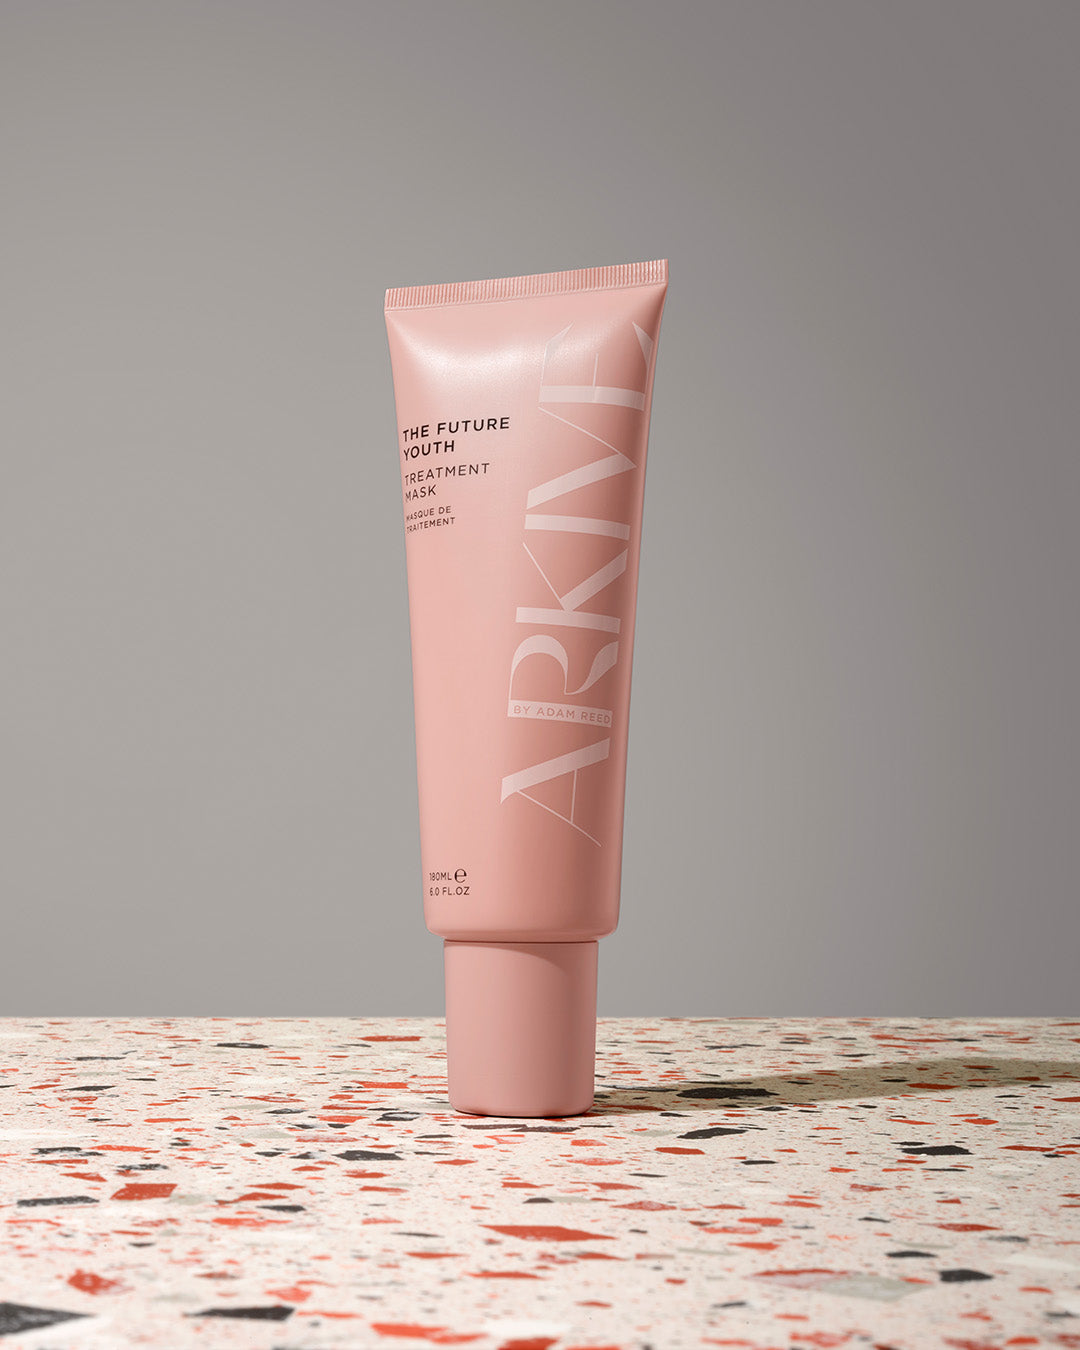 A bottle of Arkive's The Future Youth hair treatment mask on a patterned table